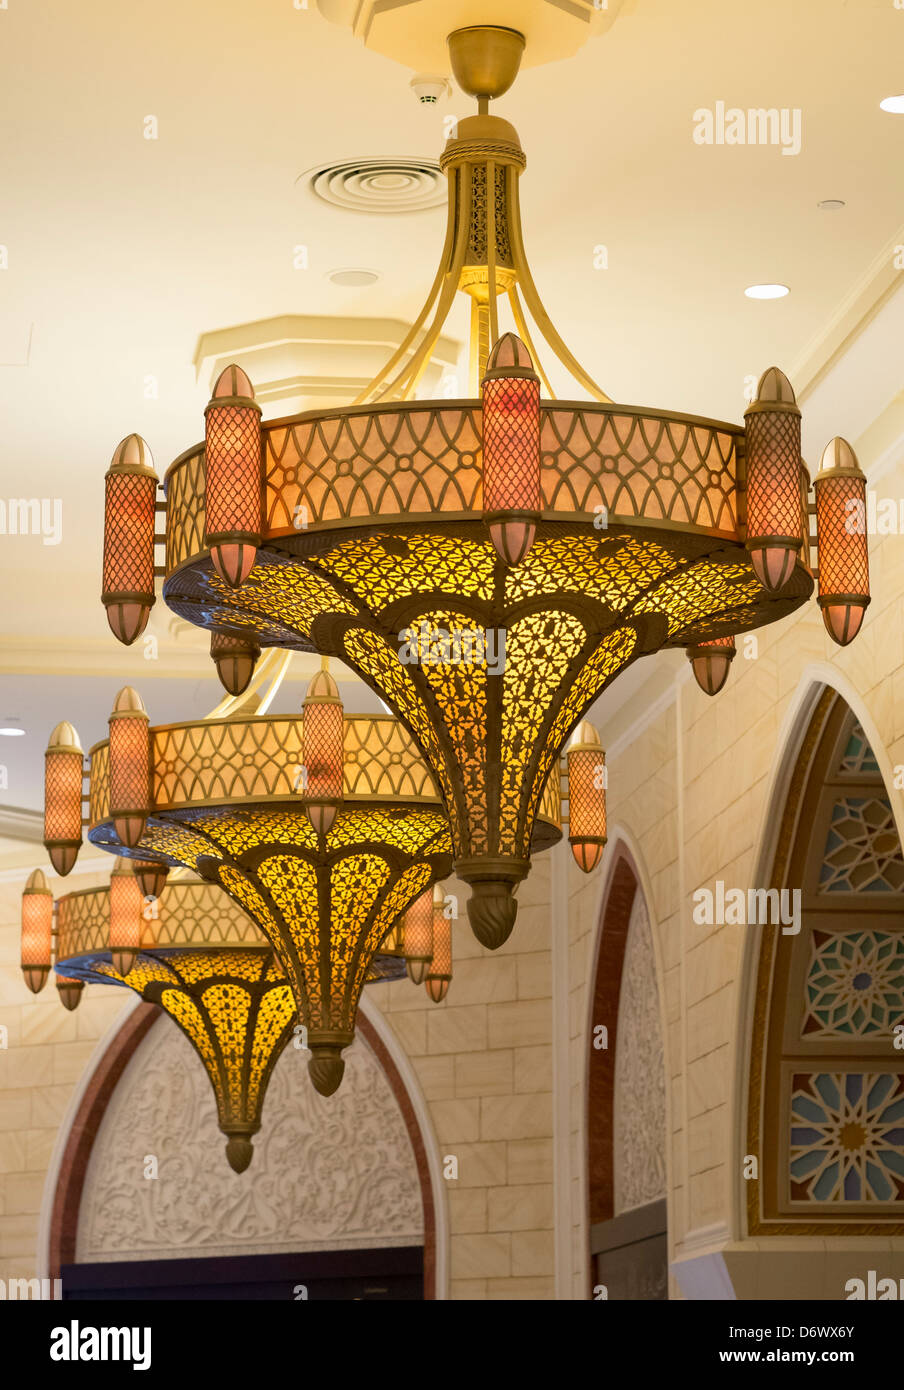 Details from The Souk inside the Dubai Mall in United Arab Emirates UAE Stock Photo